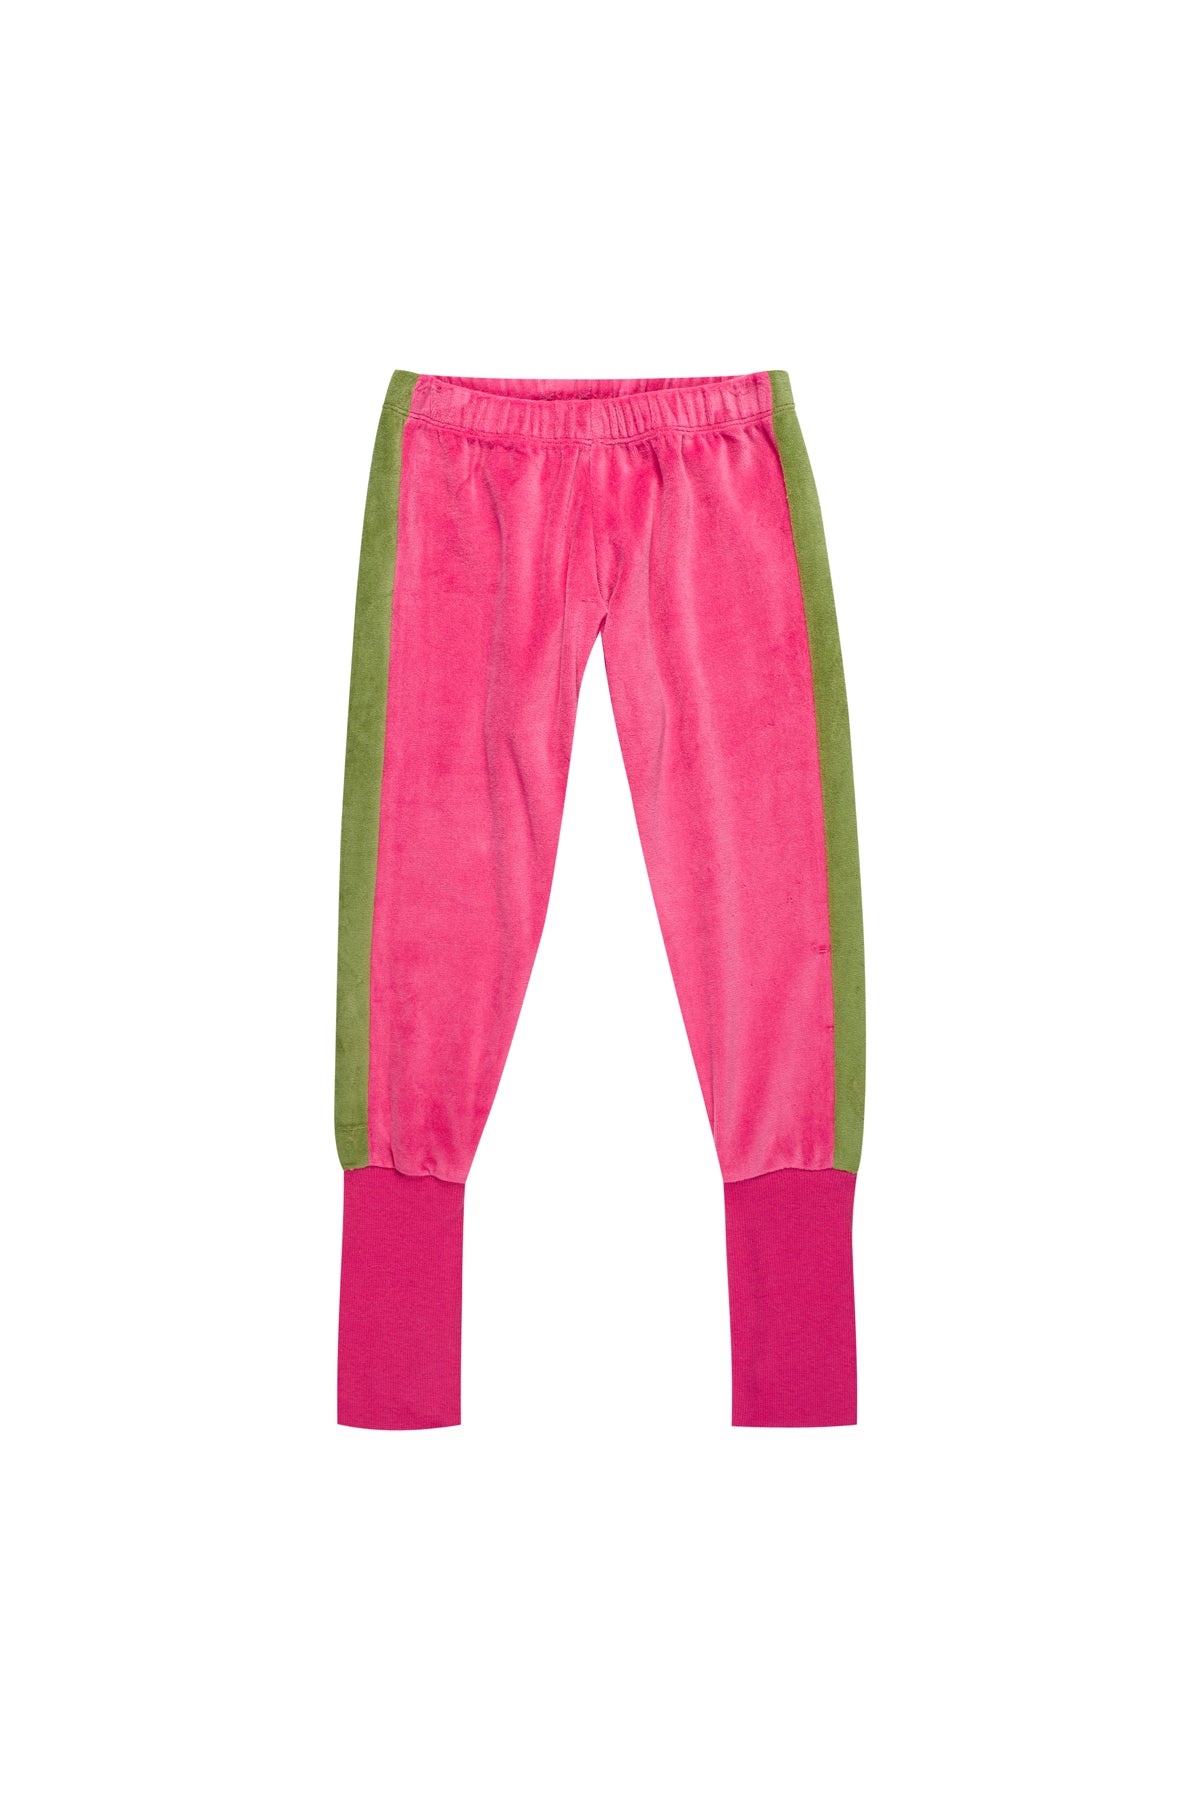 TRACKSUIT VELOUR TROUSERS WITH CONTRAST TAPE marques almeida